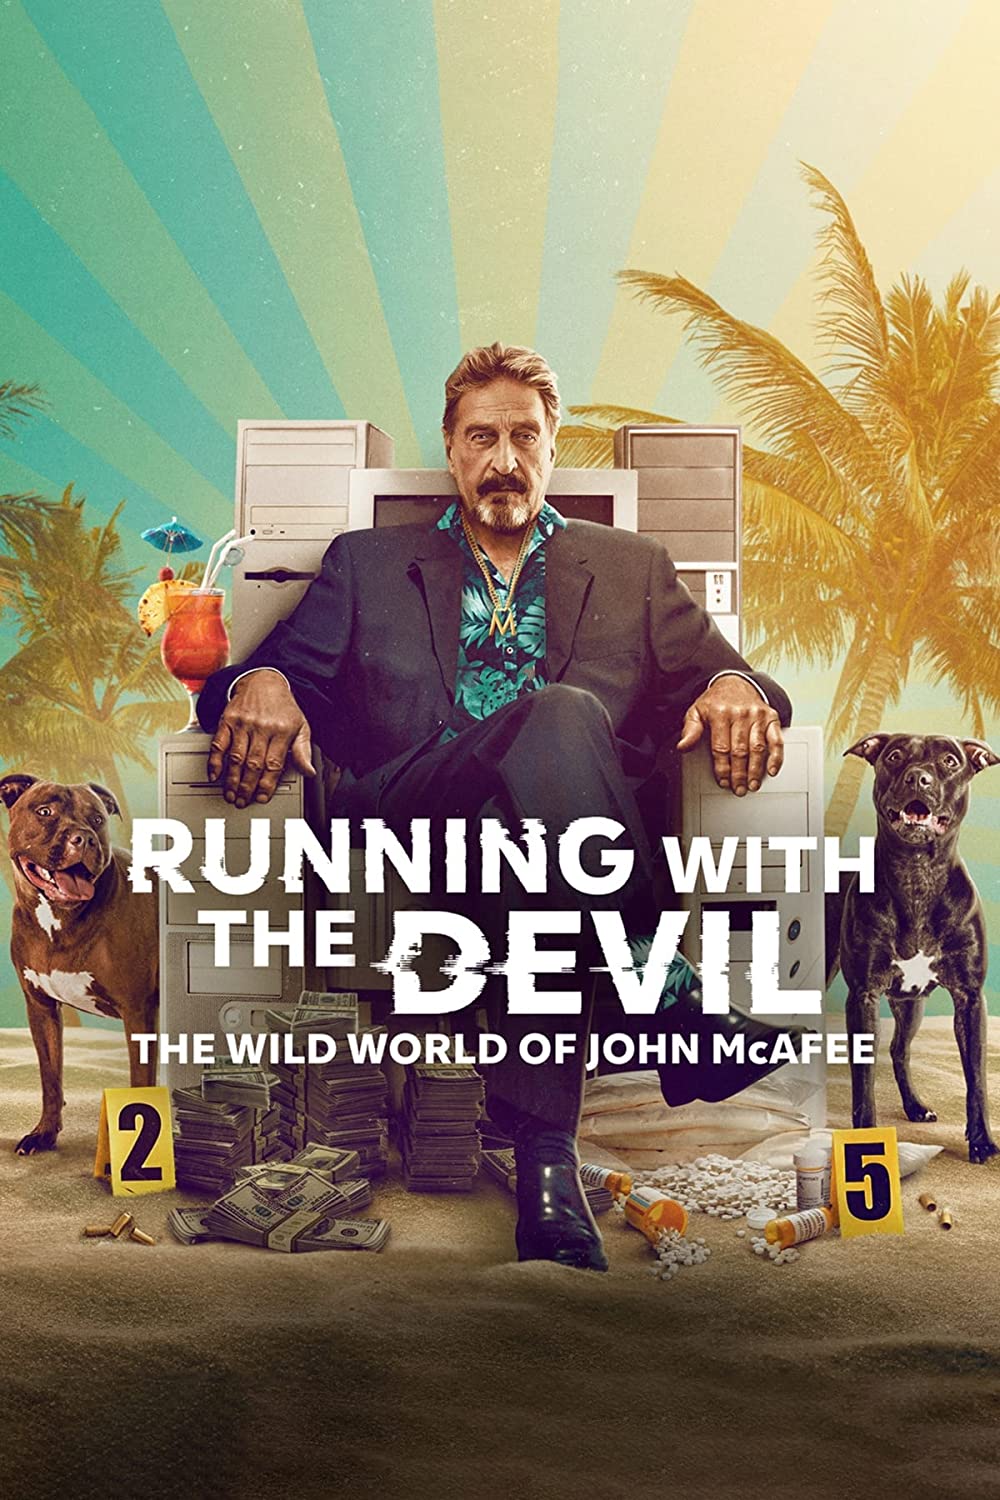 Running with the Devil: The Wild World of John McAfee izle